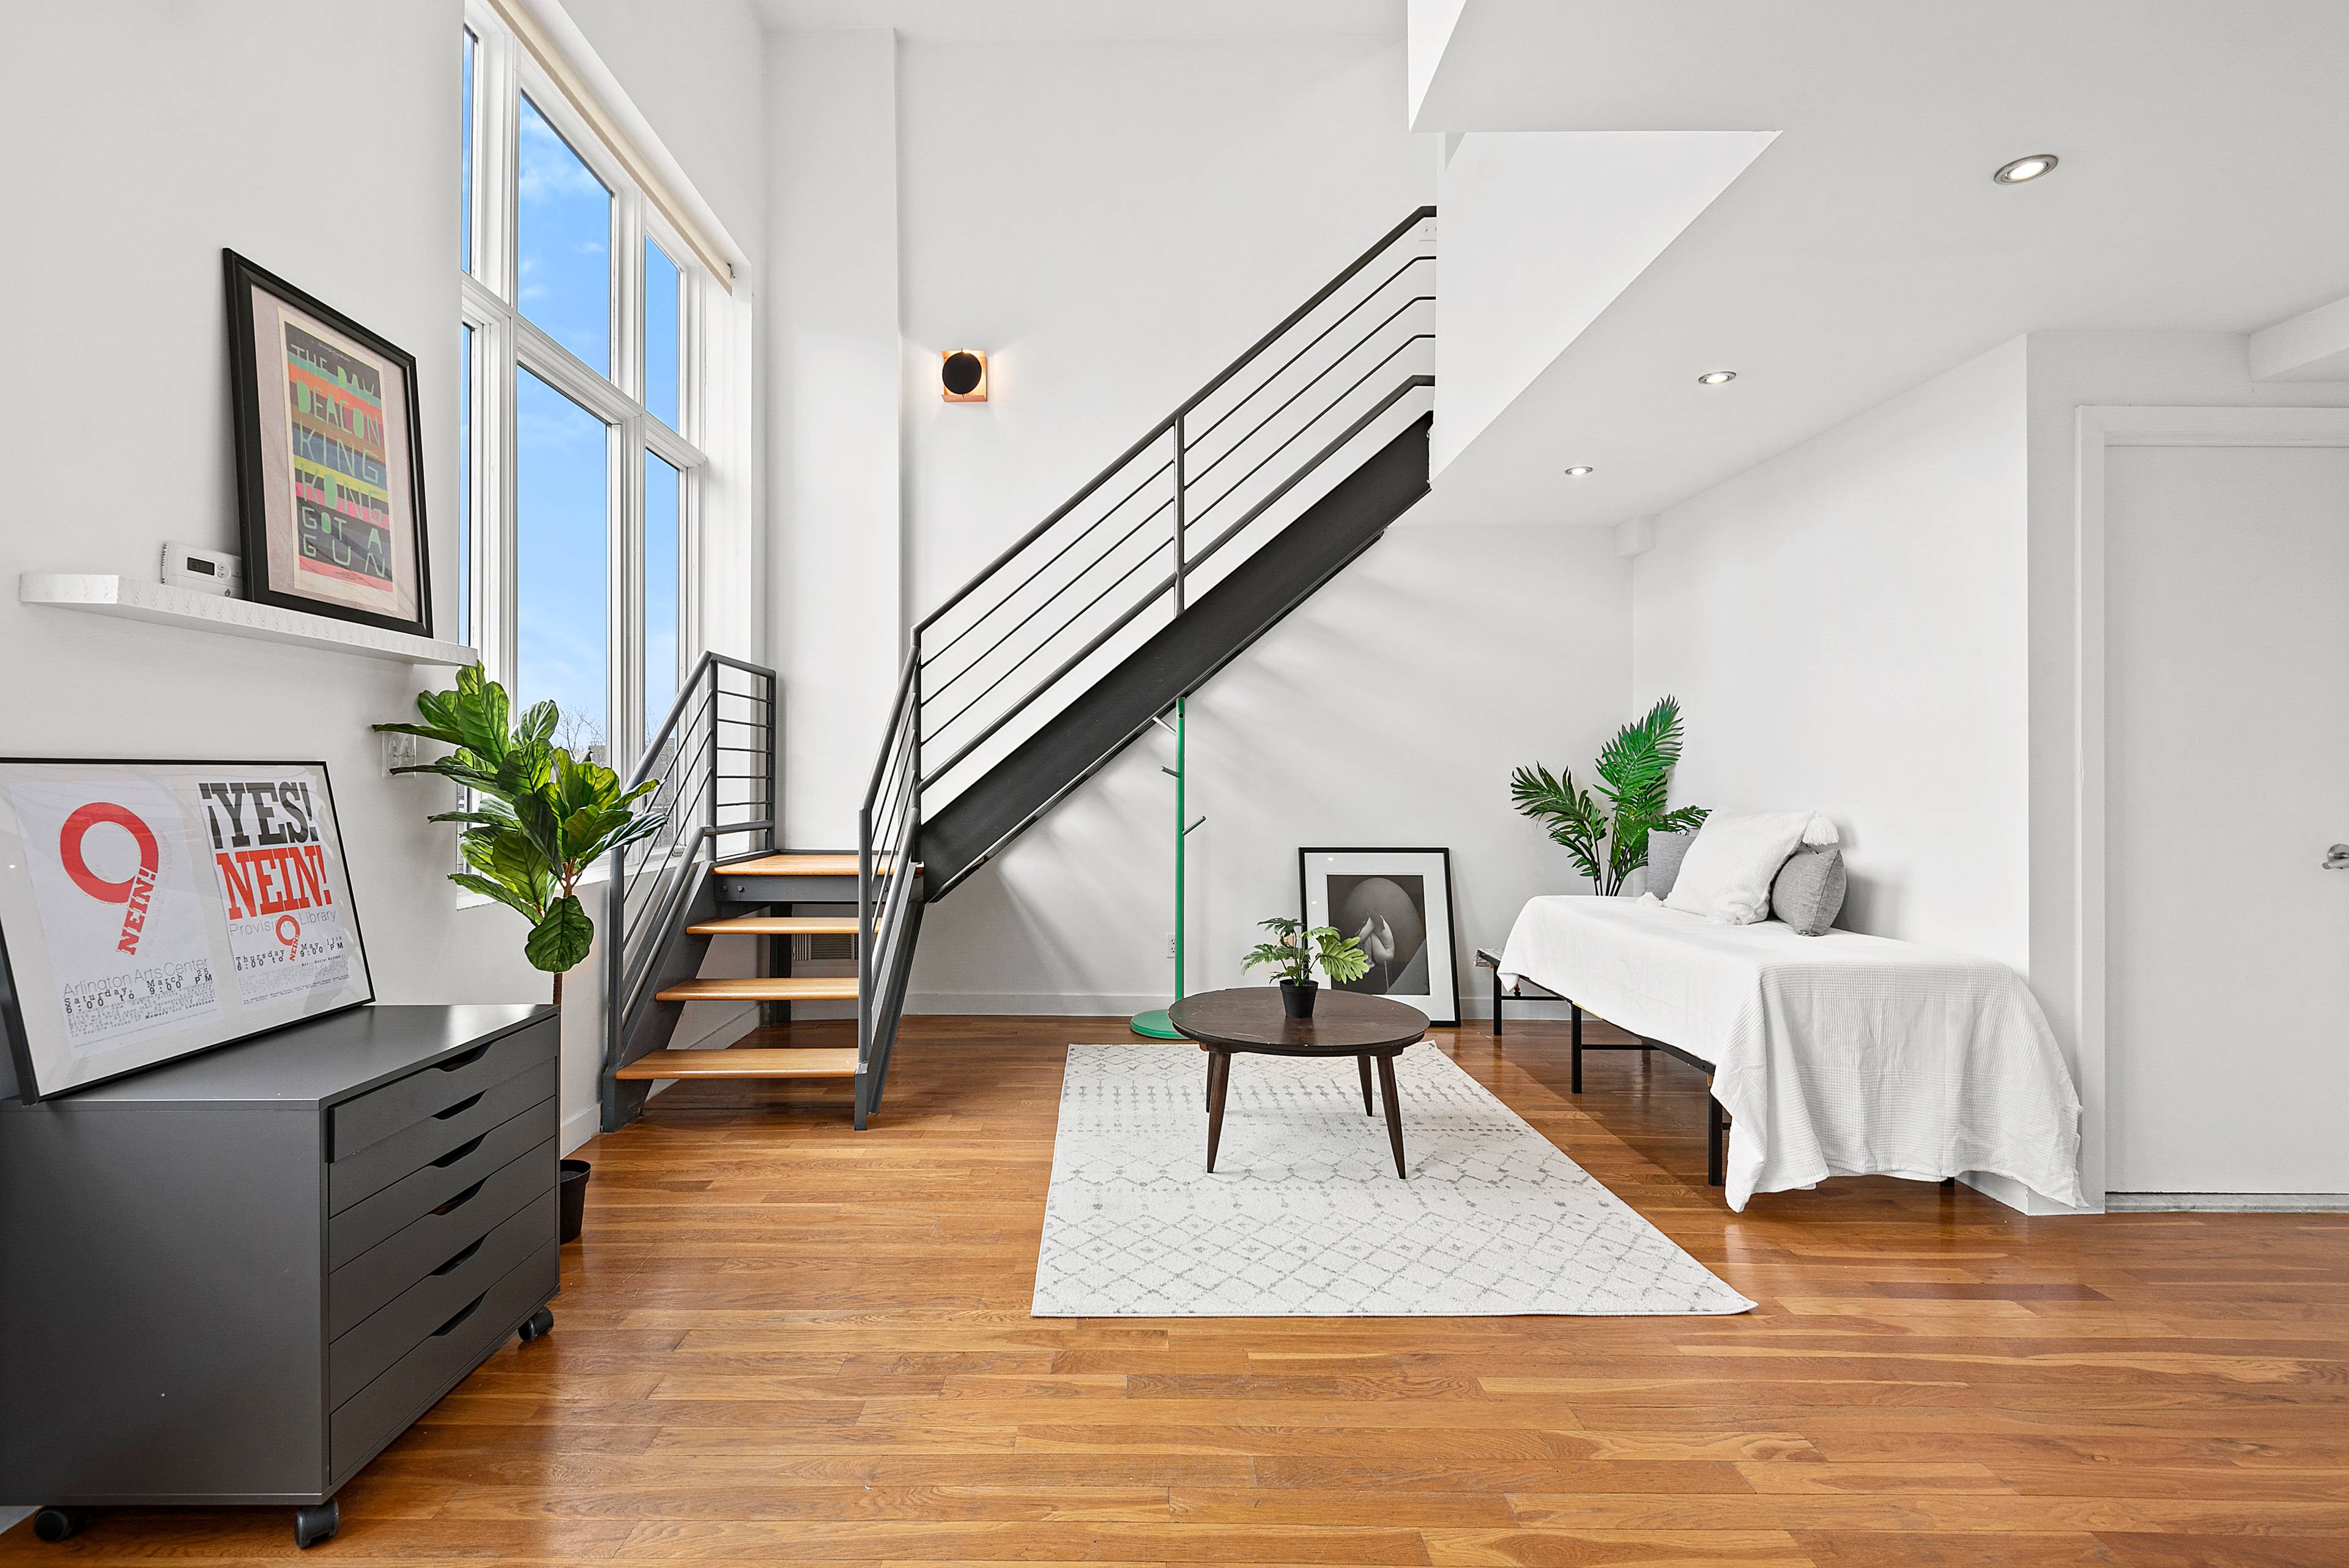 Sitting in one of the most lively and culturally rich areas in Brooklyn, this loft condo in Bed Stuy is sure to be anyone's dream.